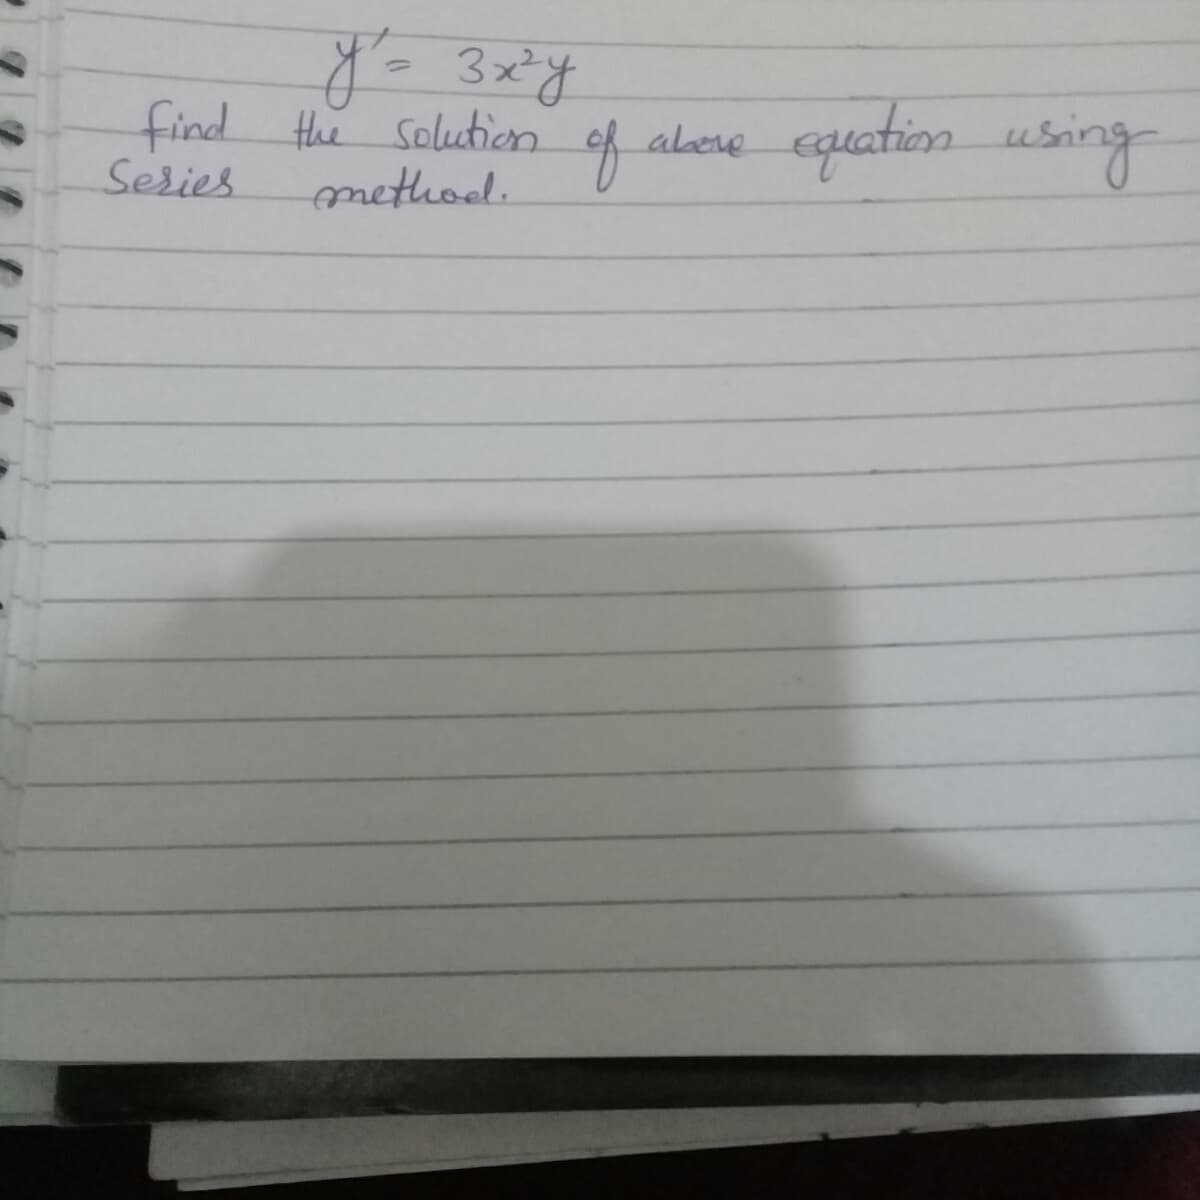 find the Solution.
Sesies
of
equation using
abere
method.
